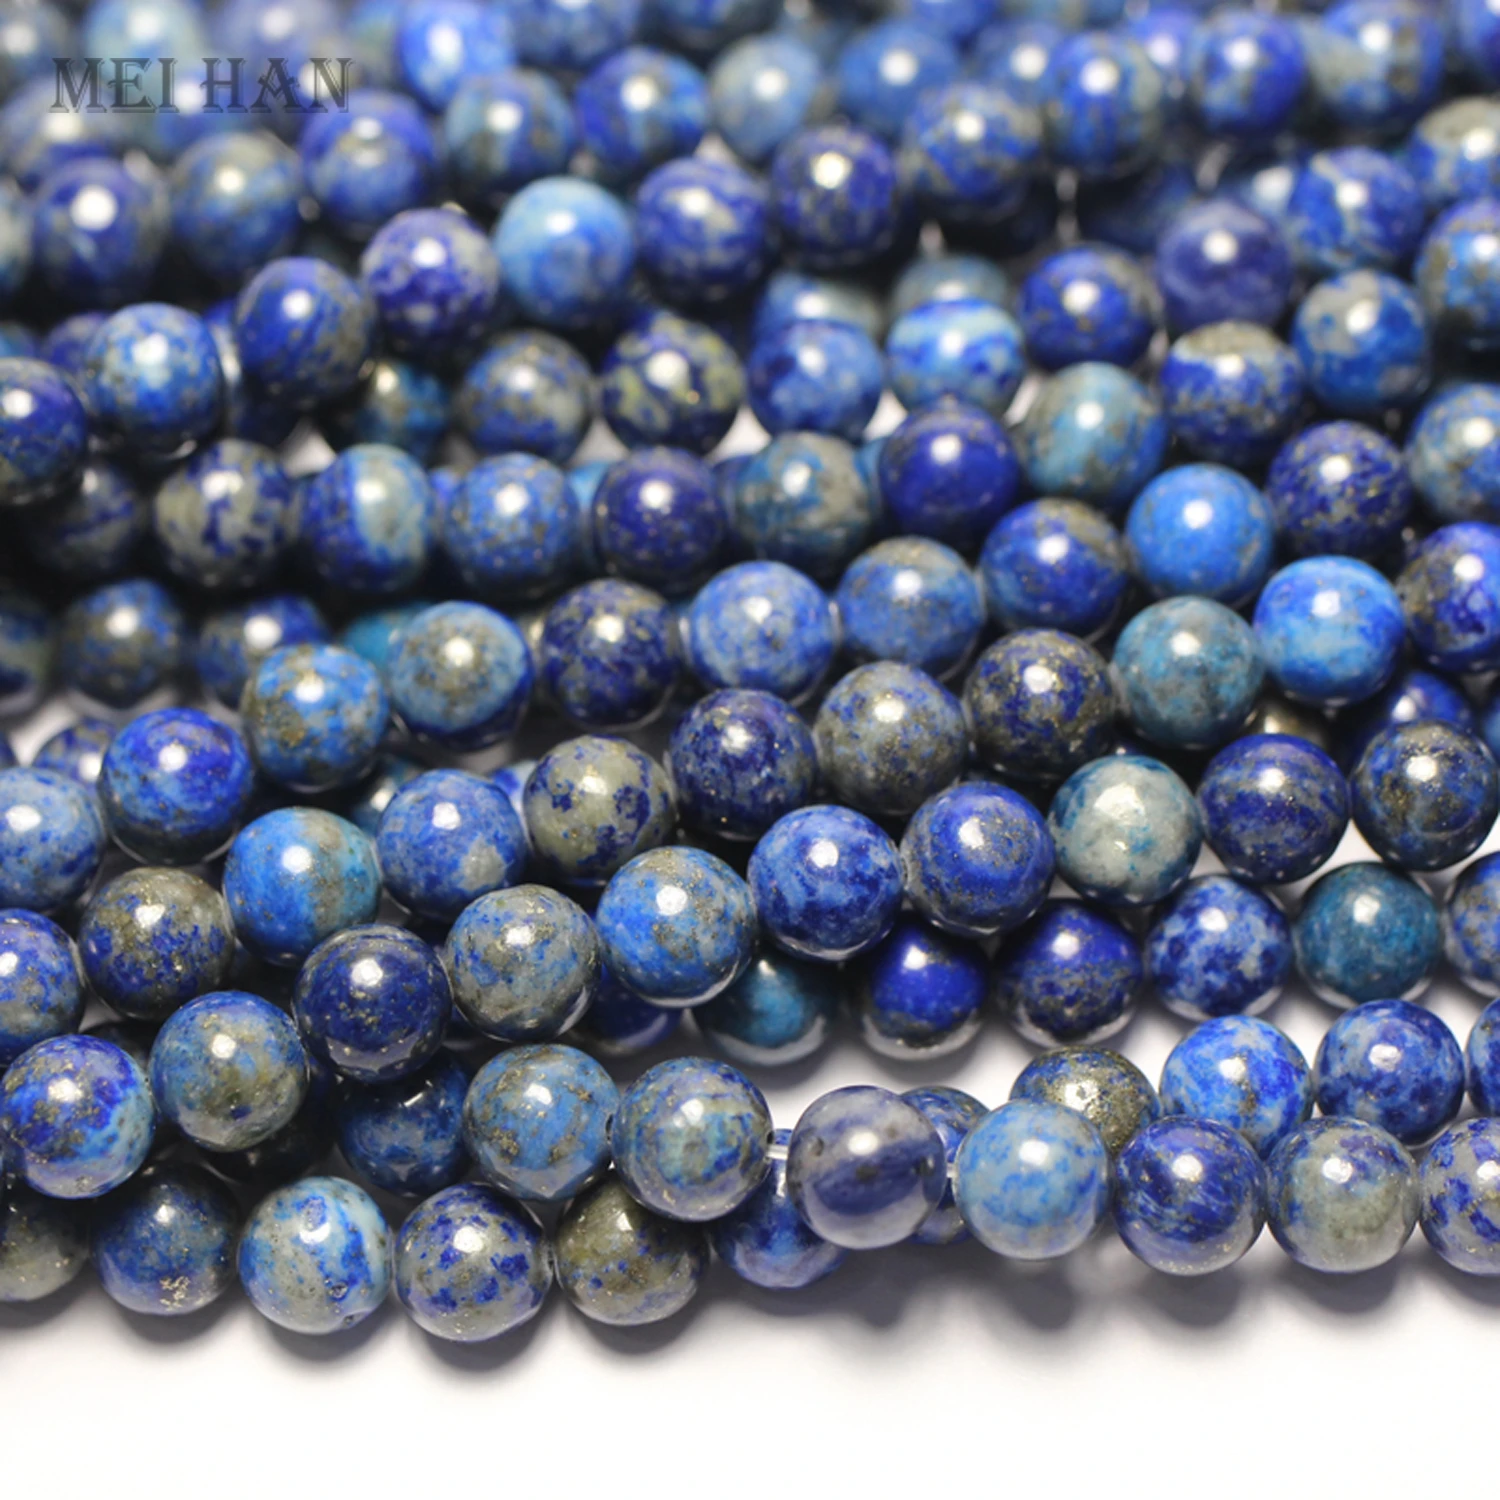 Meihan natural 6-6.5mm & 7.5-8.5mm lapis lazuli smooth round loose beads for bracelet jewelry making